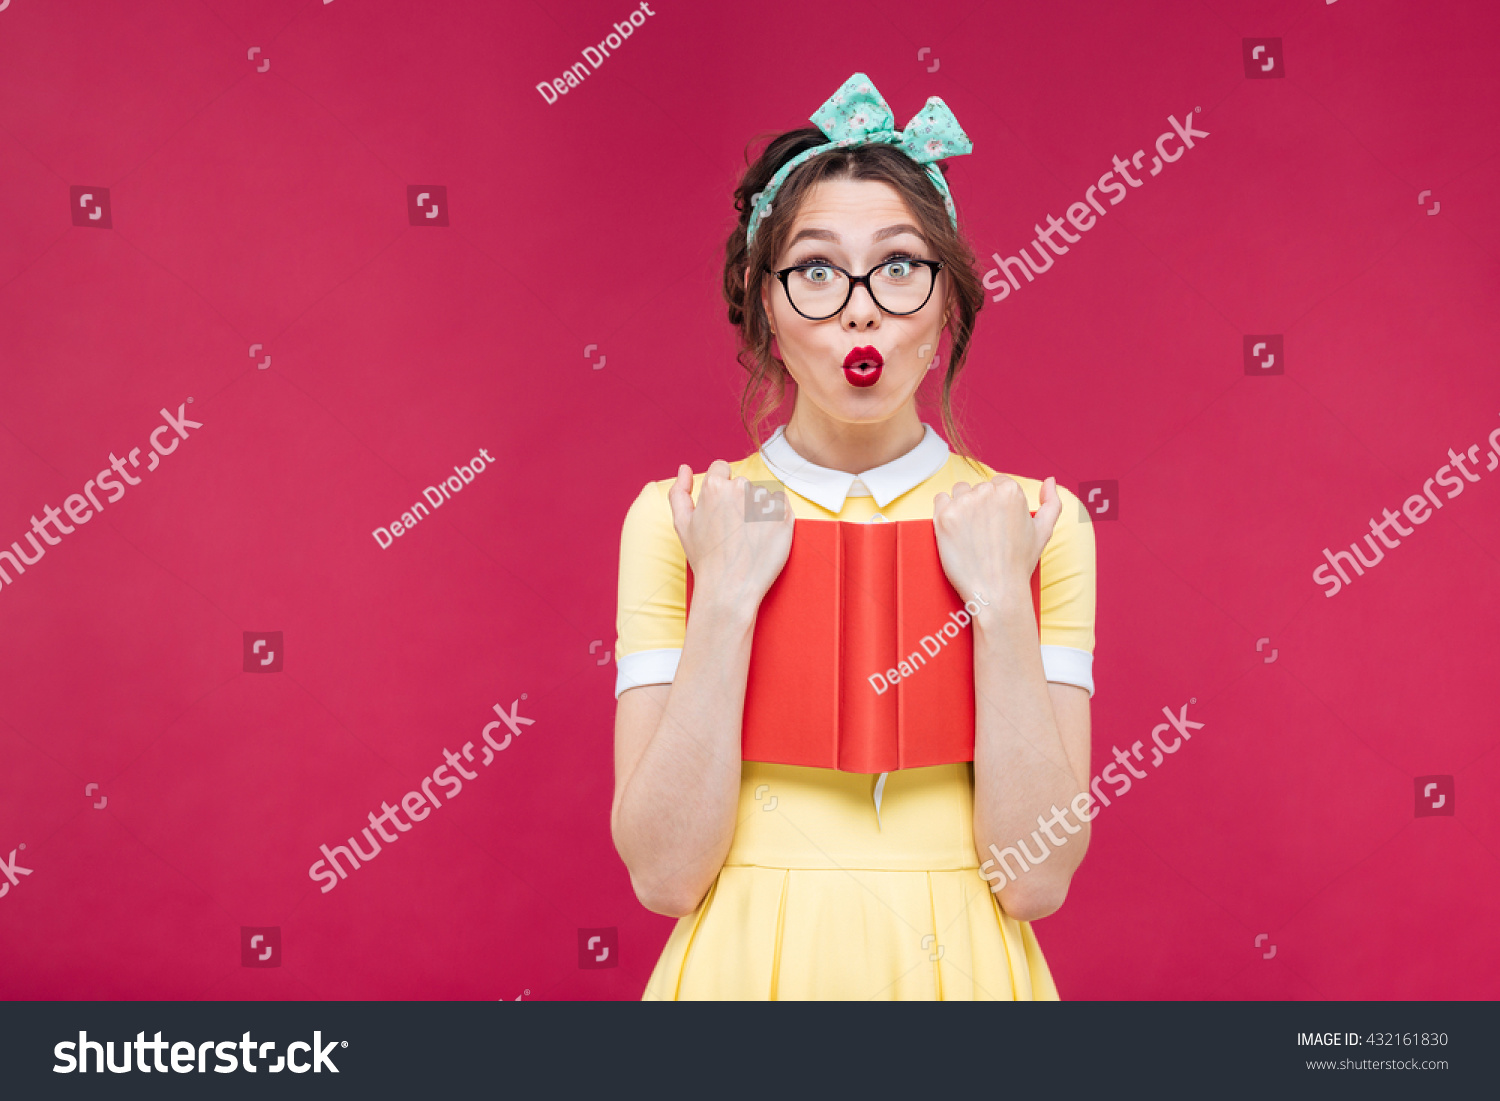 Charming surprised pinup girl in glasses standing and holding red book over pink background #432161830